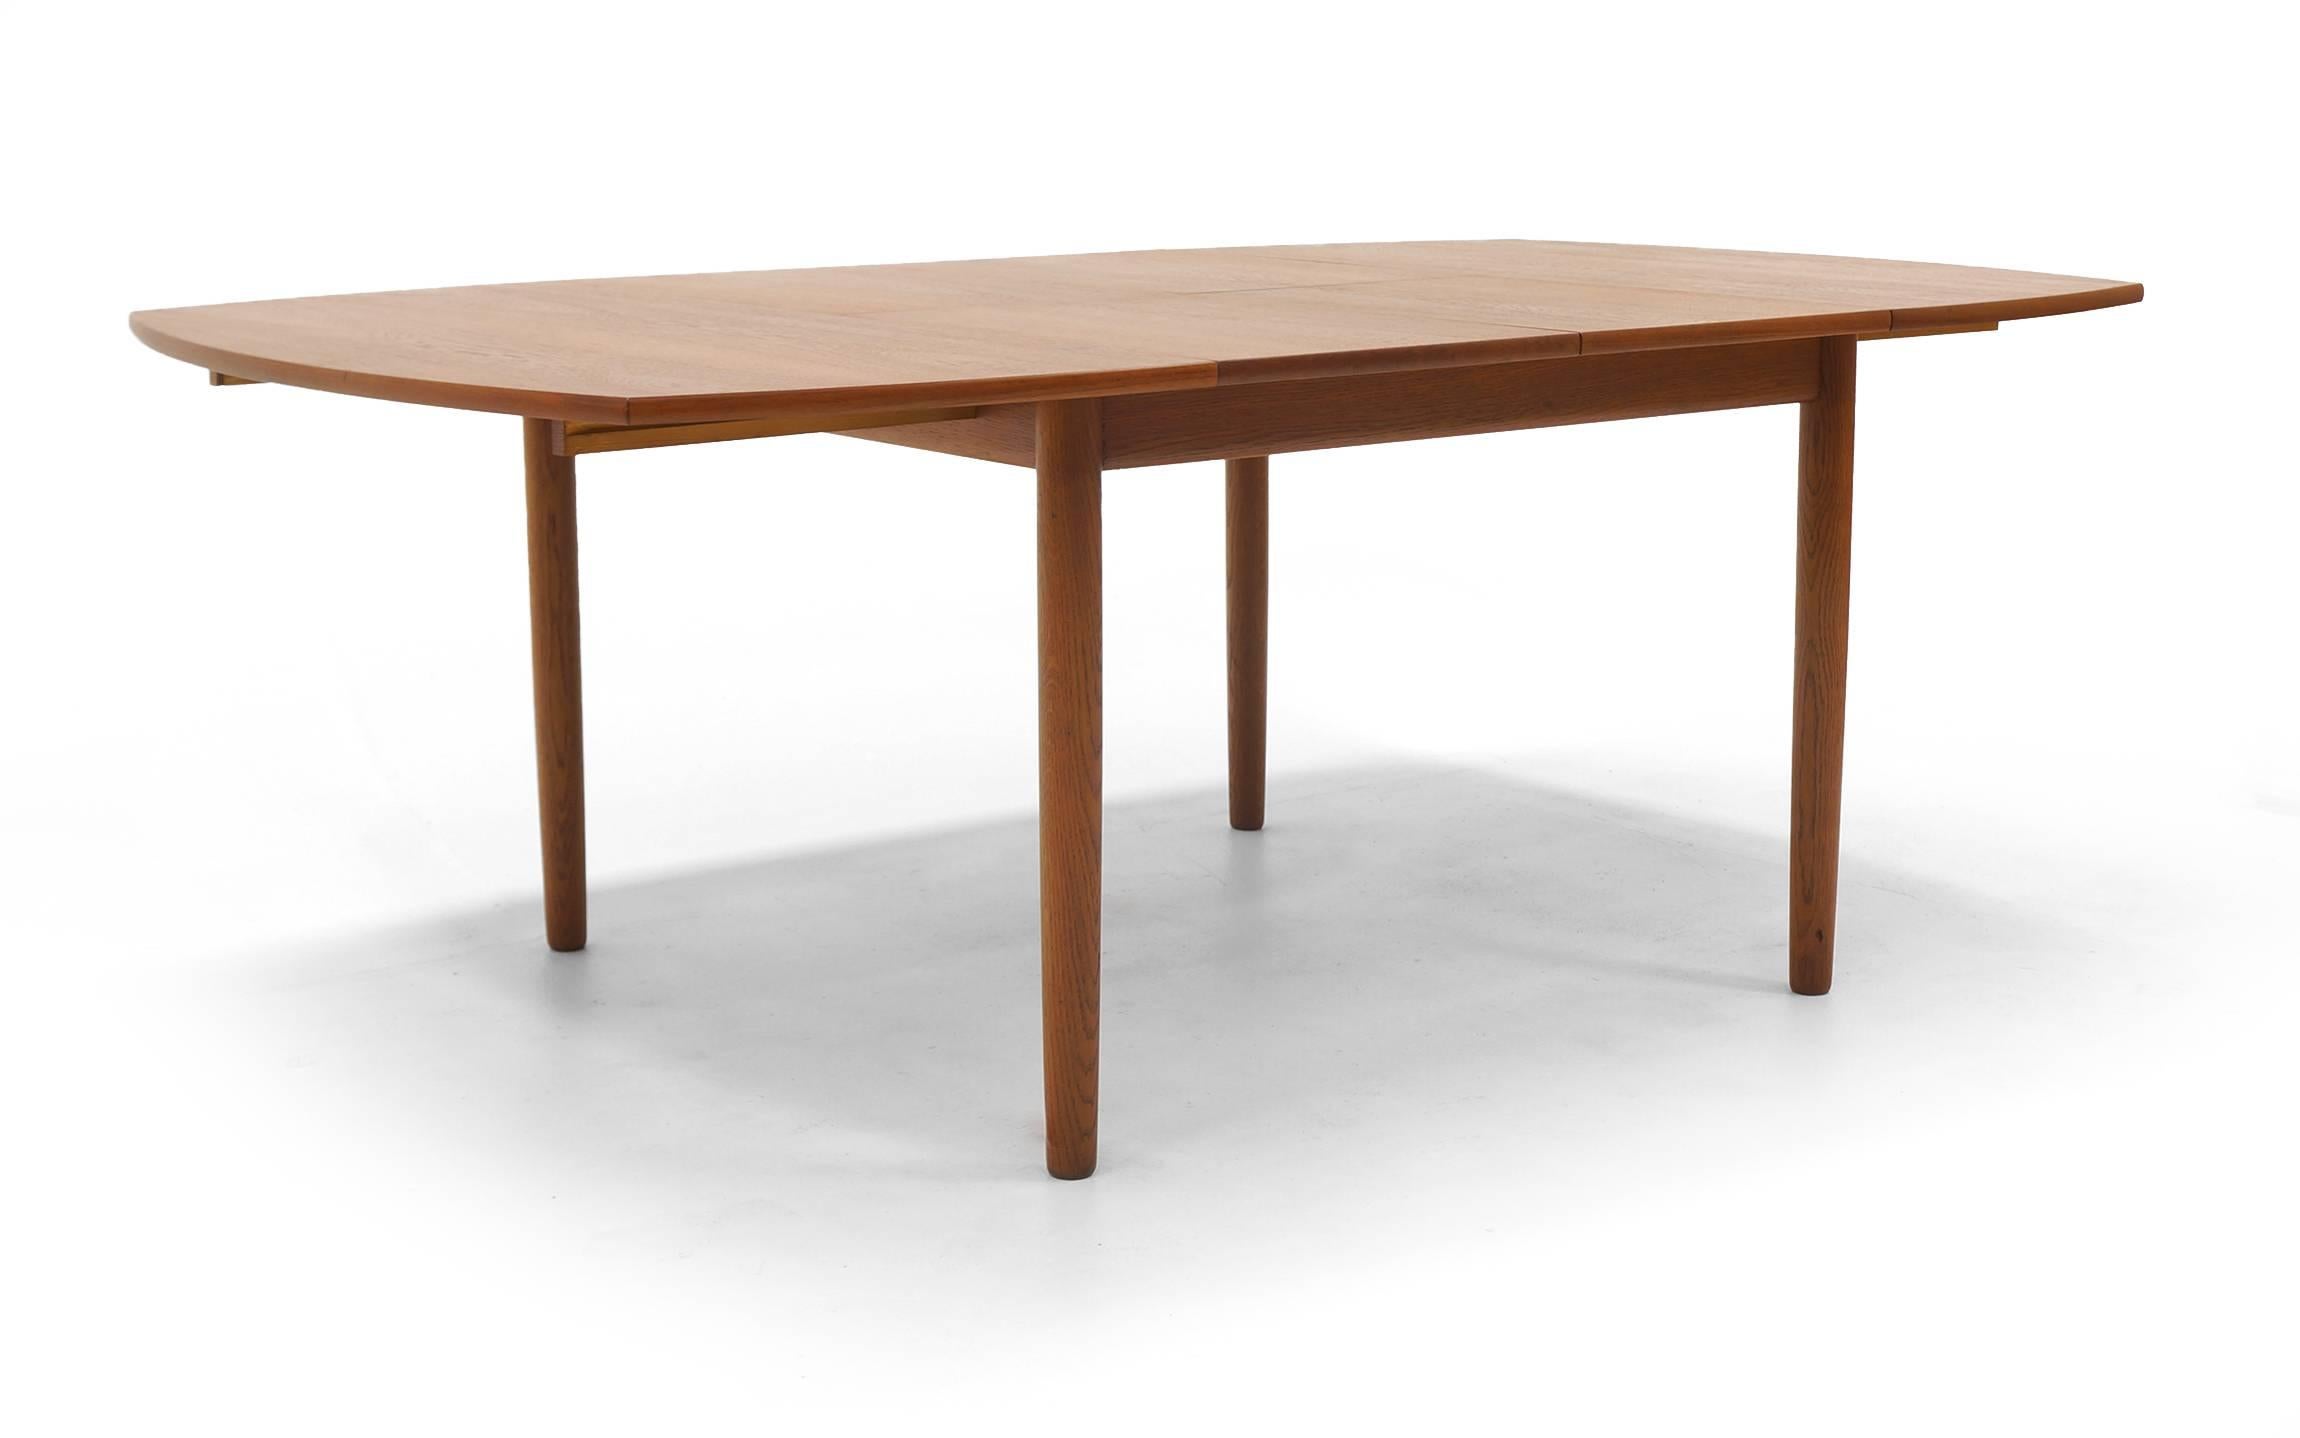 Square Expanding Danish Modern Teak Dining Table by Ejner Larsen & Aksel Madsen In Excellent Condition For Sale In Kansas City, MO